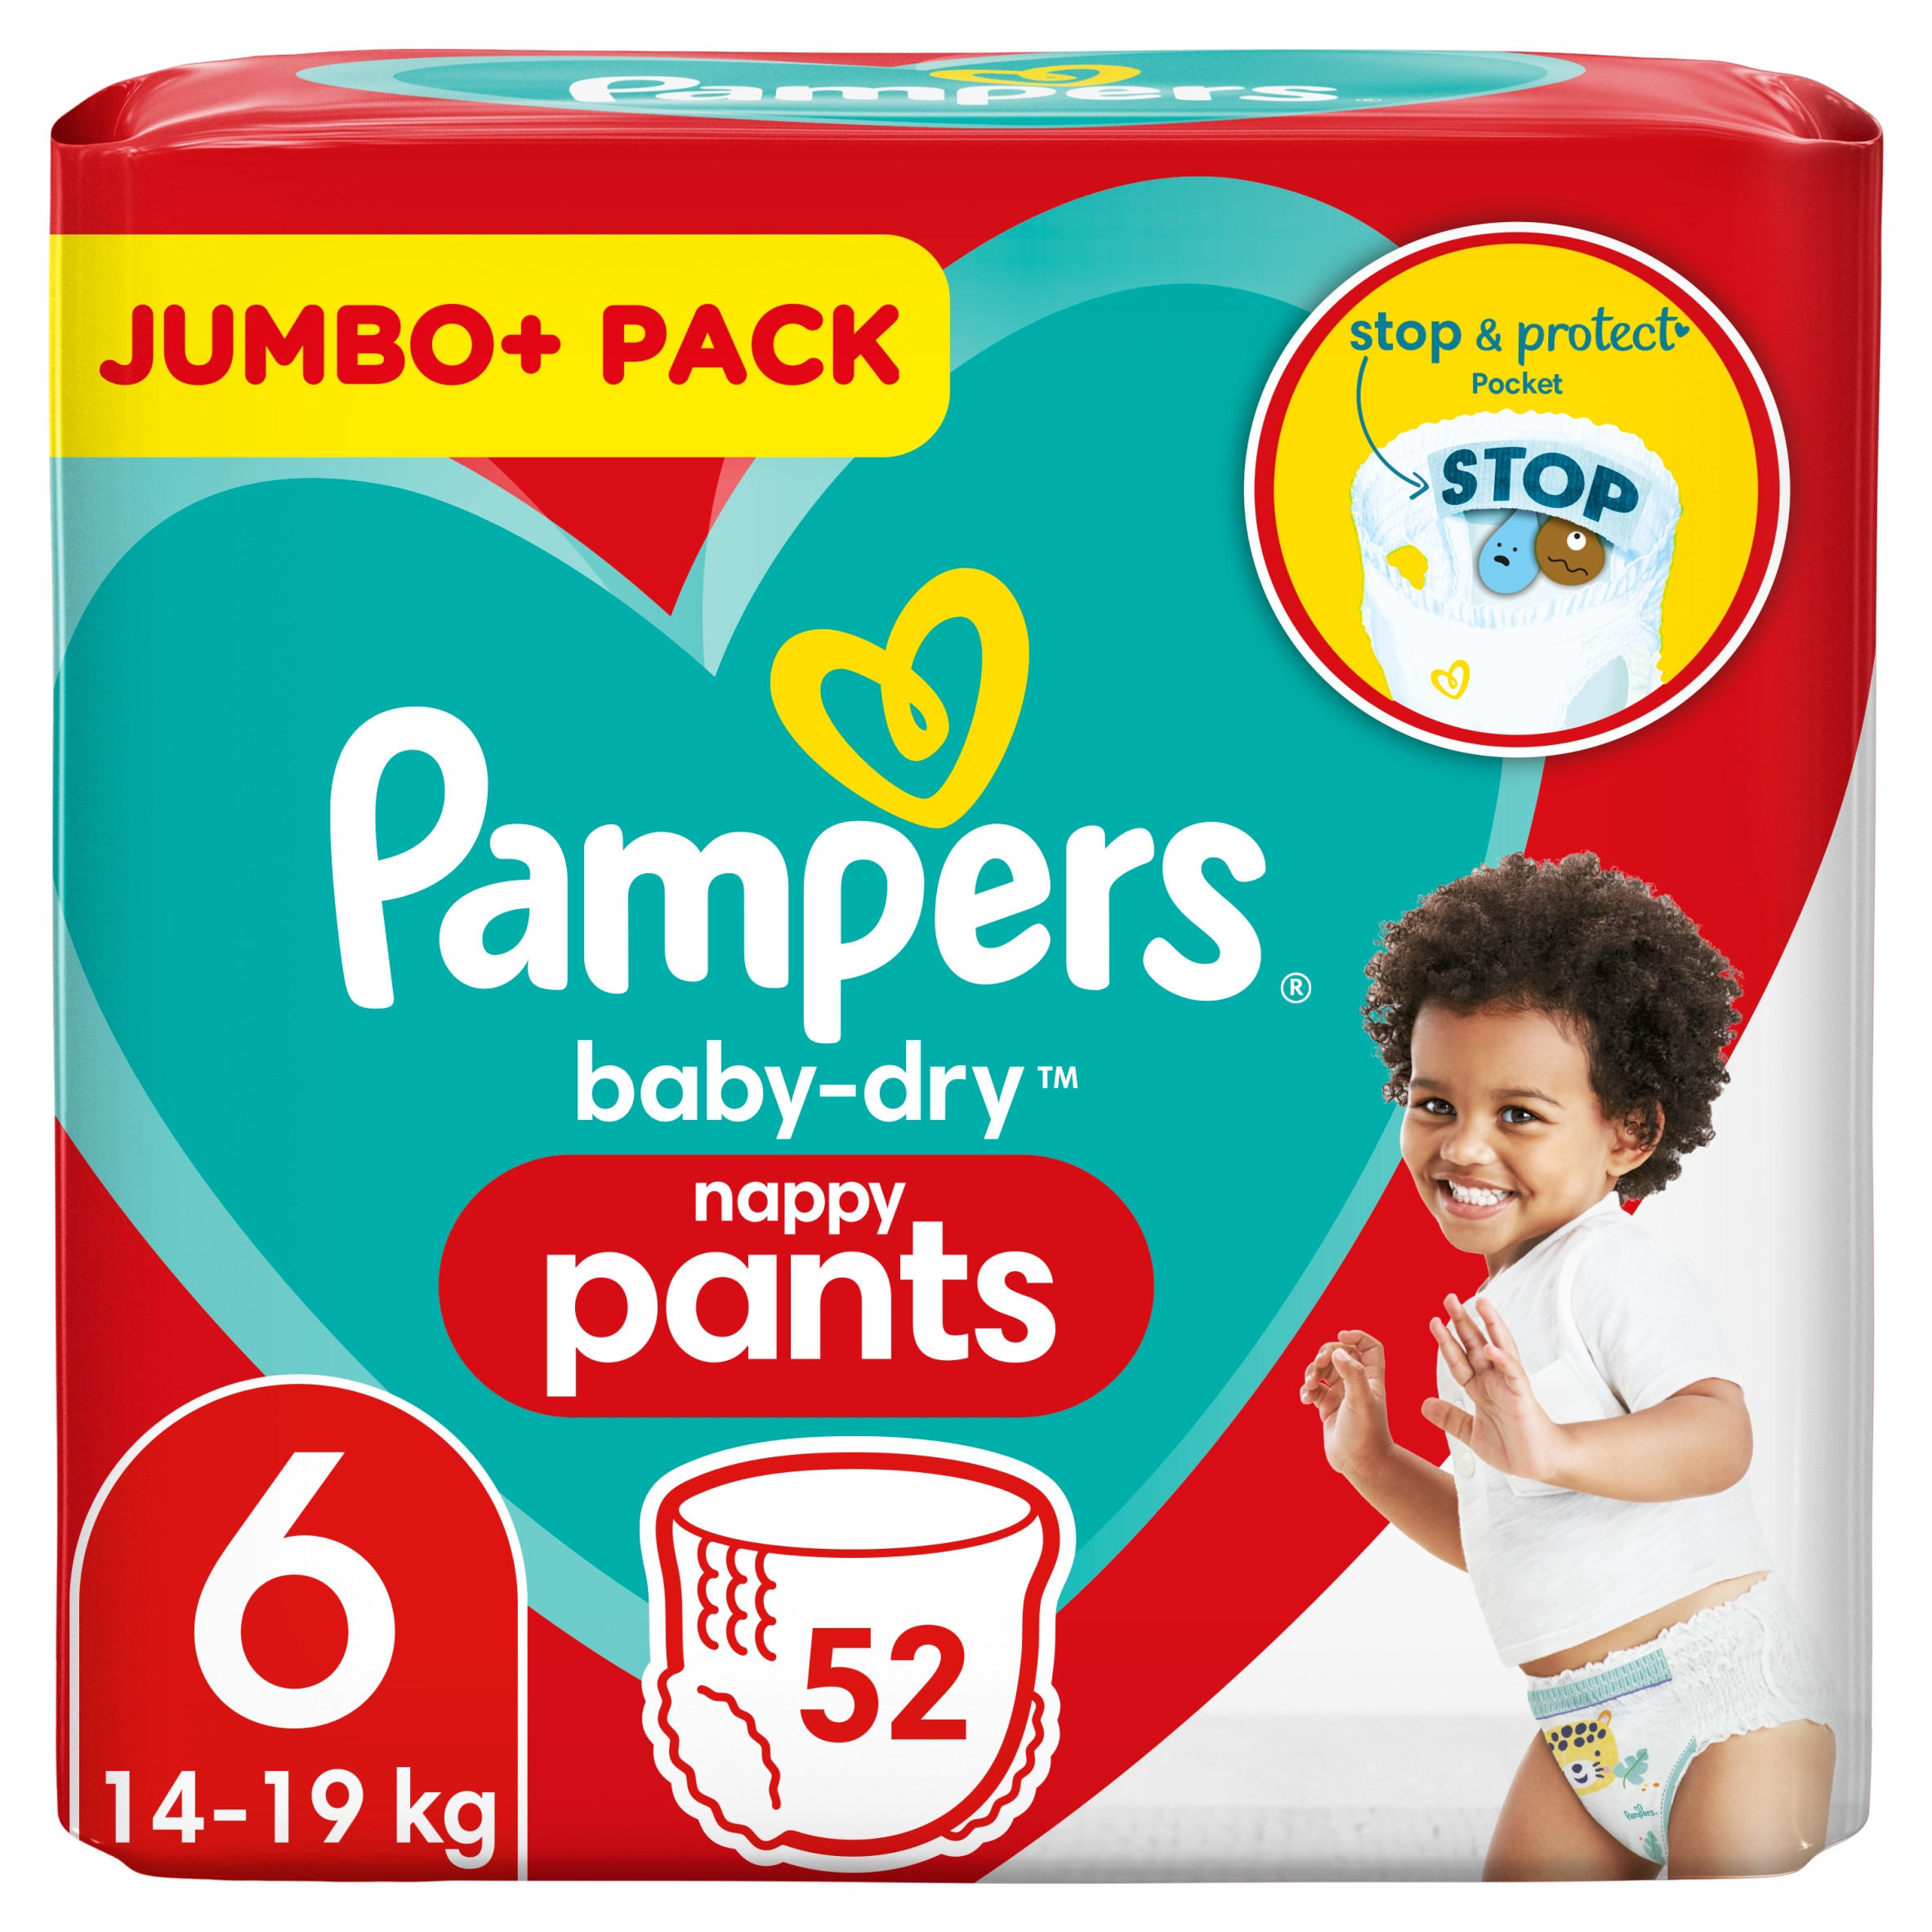 Pampers Baby-Dry Nappy Pants Size 6, 19 Nappies, 14kg - 19kg, Carry Pack